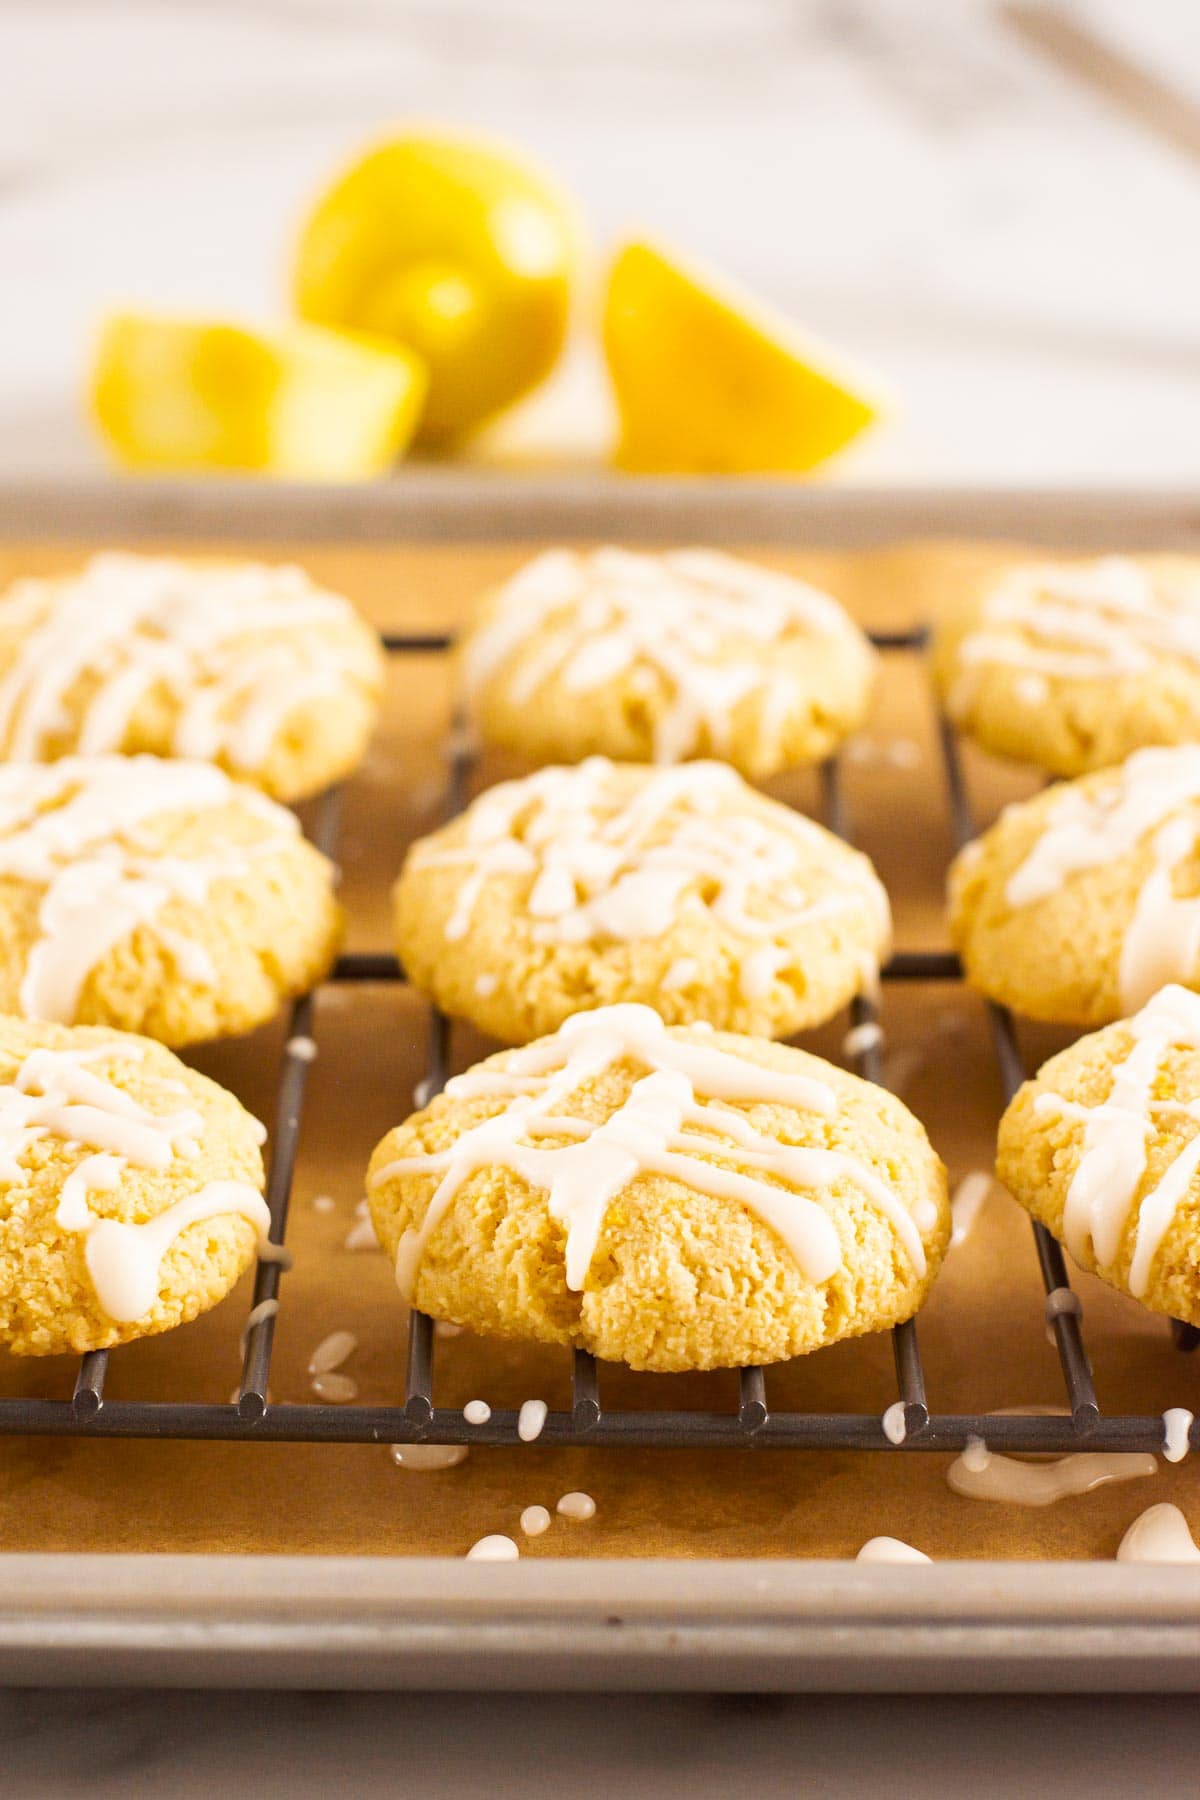 Healthy lemon cookies with almond flour drizzled with icing on baking rack.